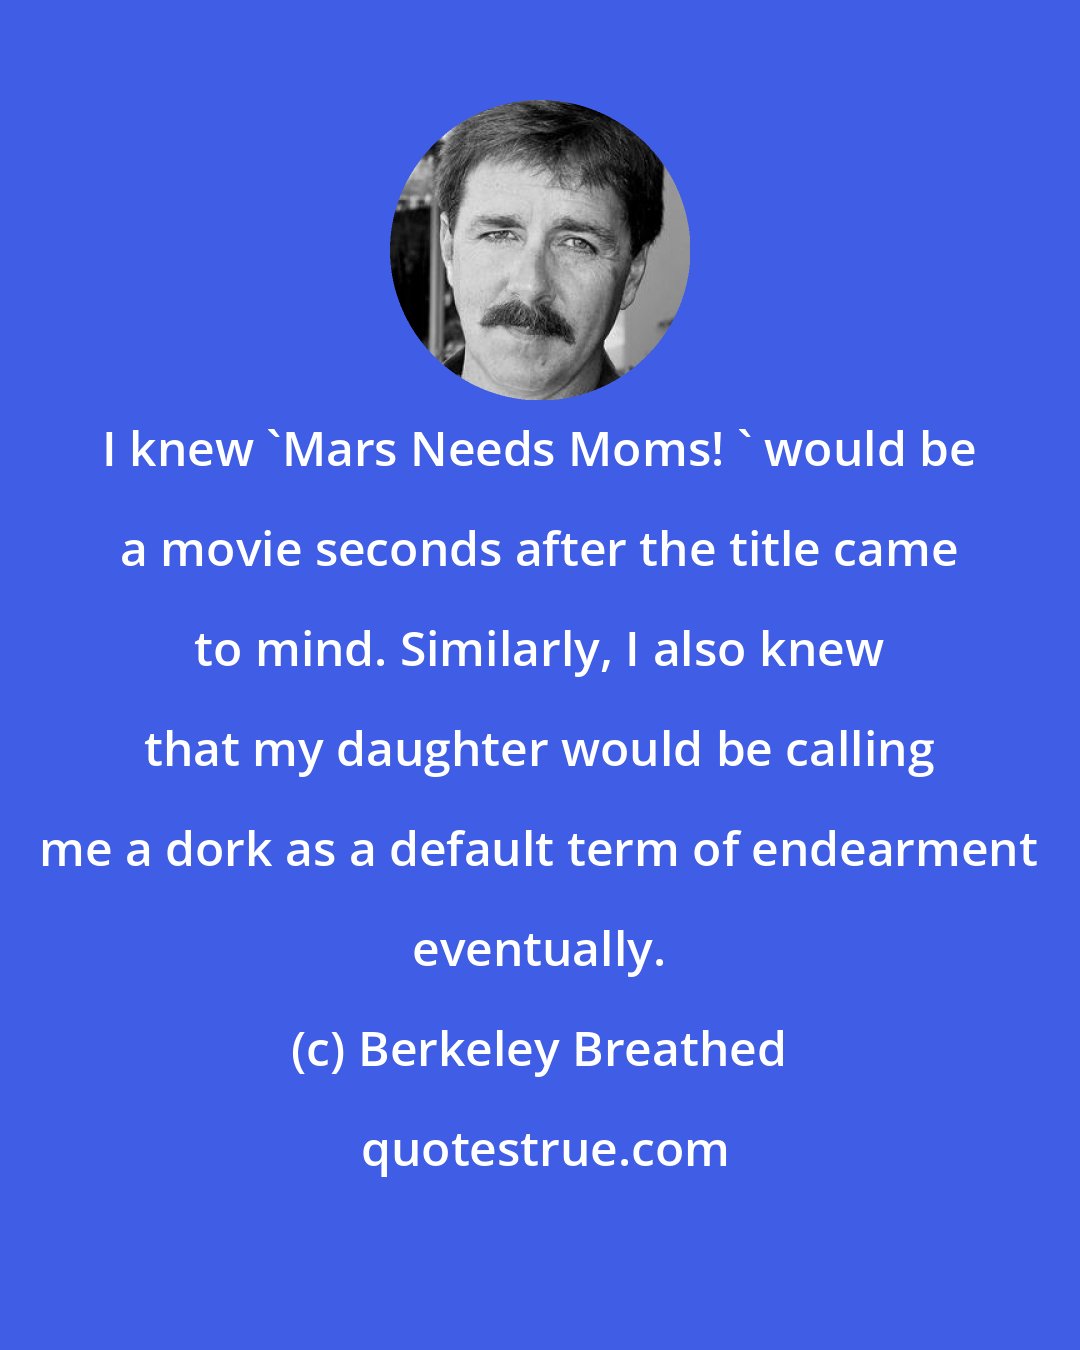 Berkeley Breathed: I knew 'Mars Needs Moms! ' would be a movie seconds after the title came to mind. Similarly, I also knew that my daughter would be calling me a dork as a default term of endearment eventually.